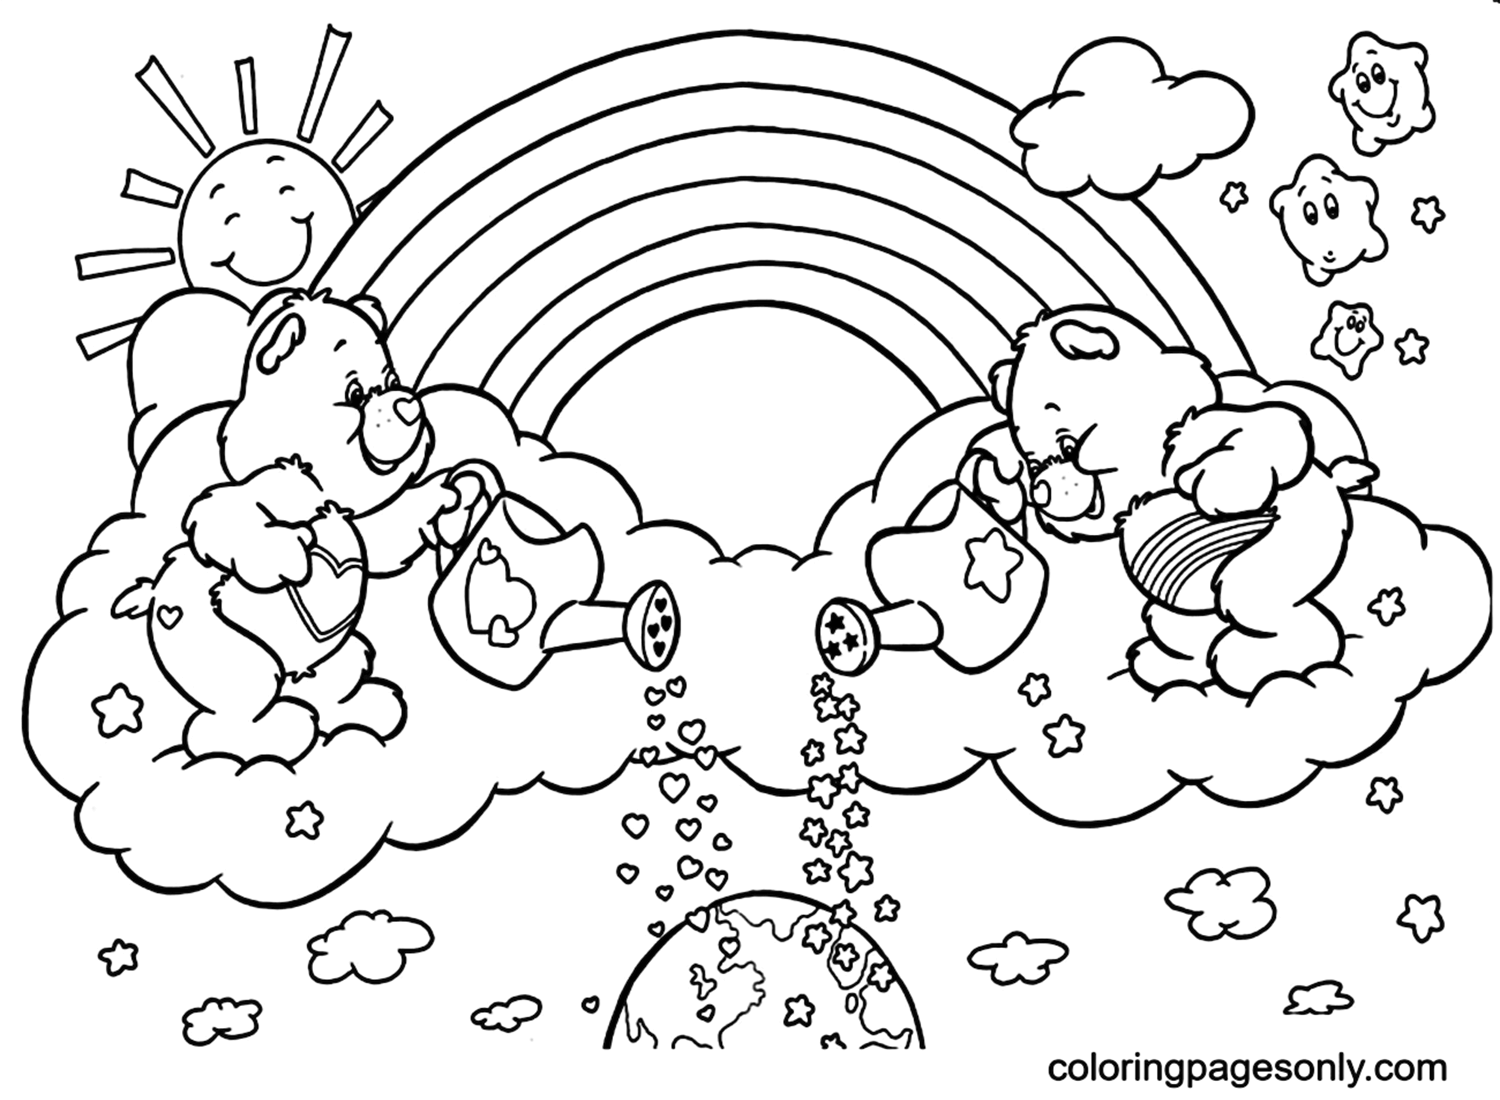 Bears On The Cloud And Rainbow Coloring Pages